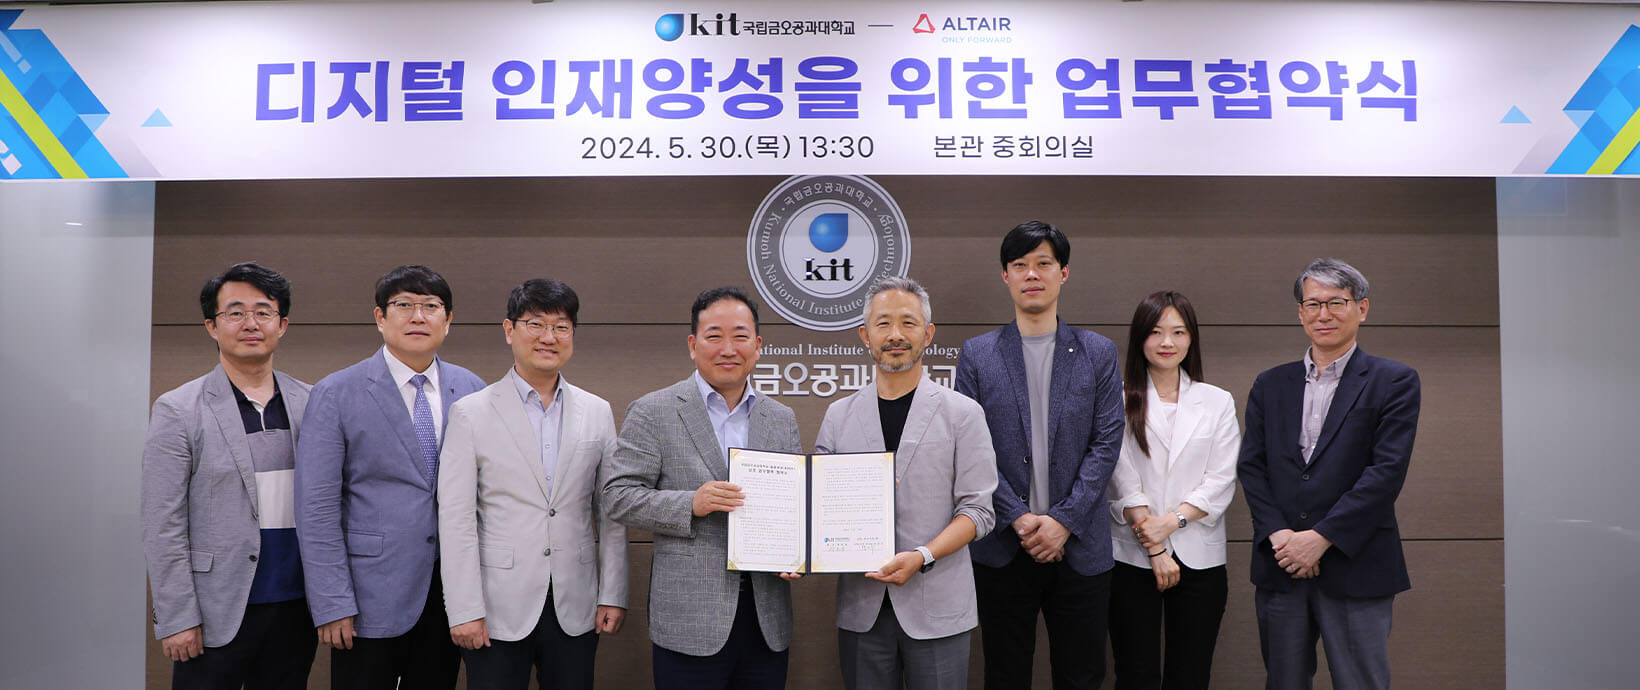 Altair Signs Partnership with Kumoh National Institute of Technology to Foster Digital Talent in Gyeongbuk